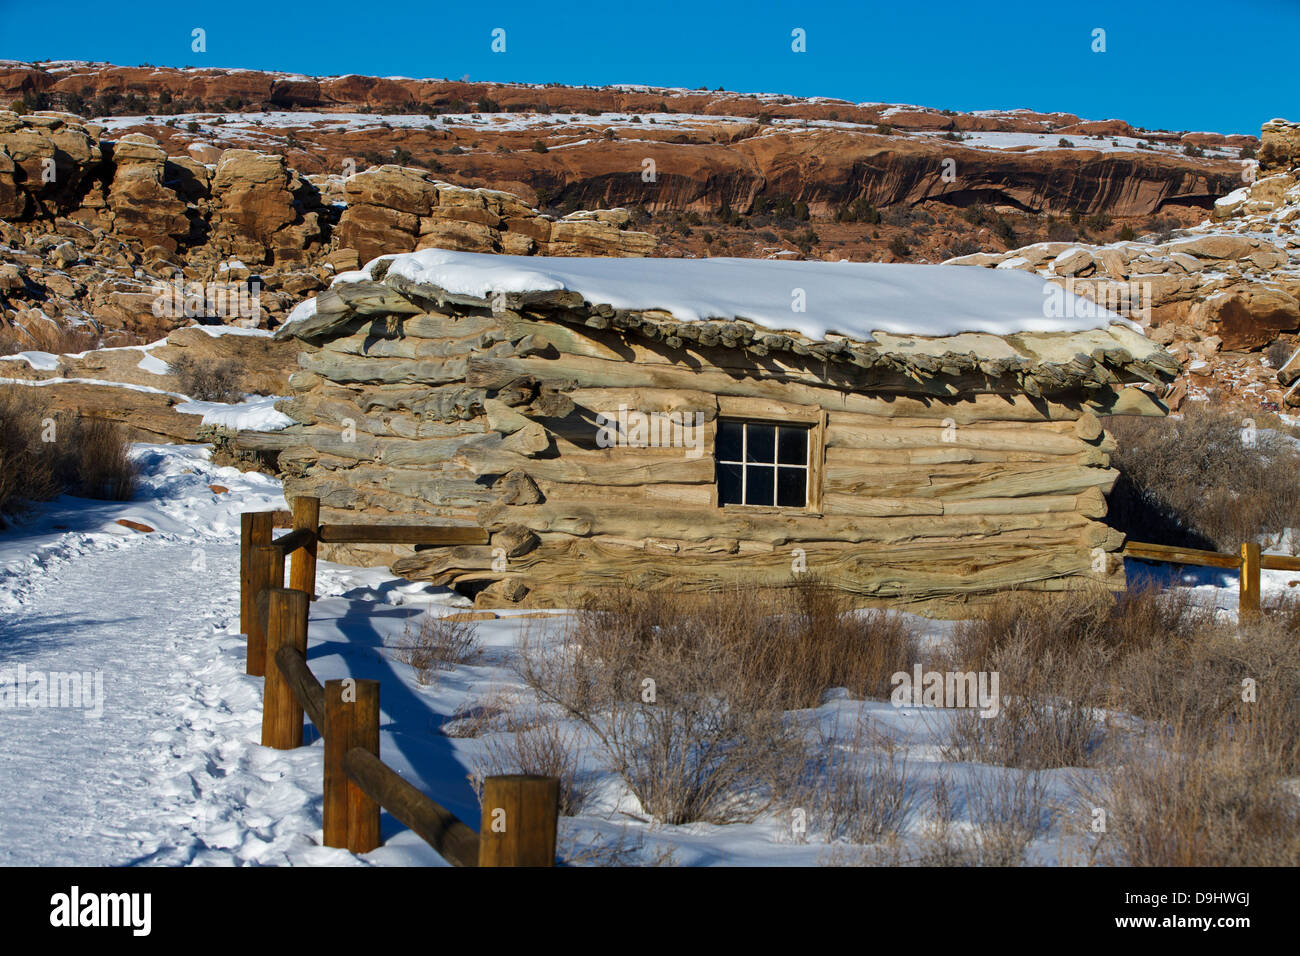 Log cabin at Wolfe Ranch, with snow on the ground, Arches National Park, Utah, United States of America Stock Photo